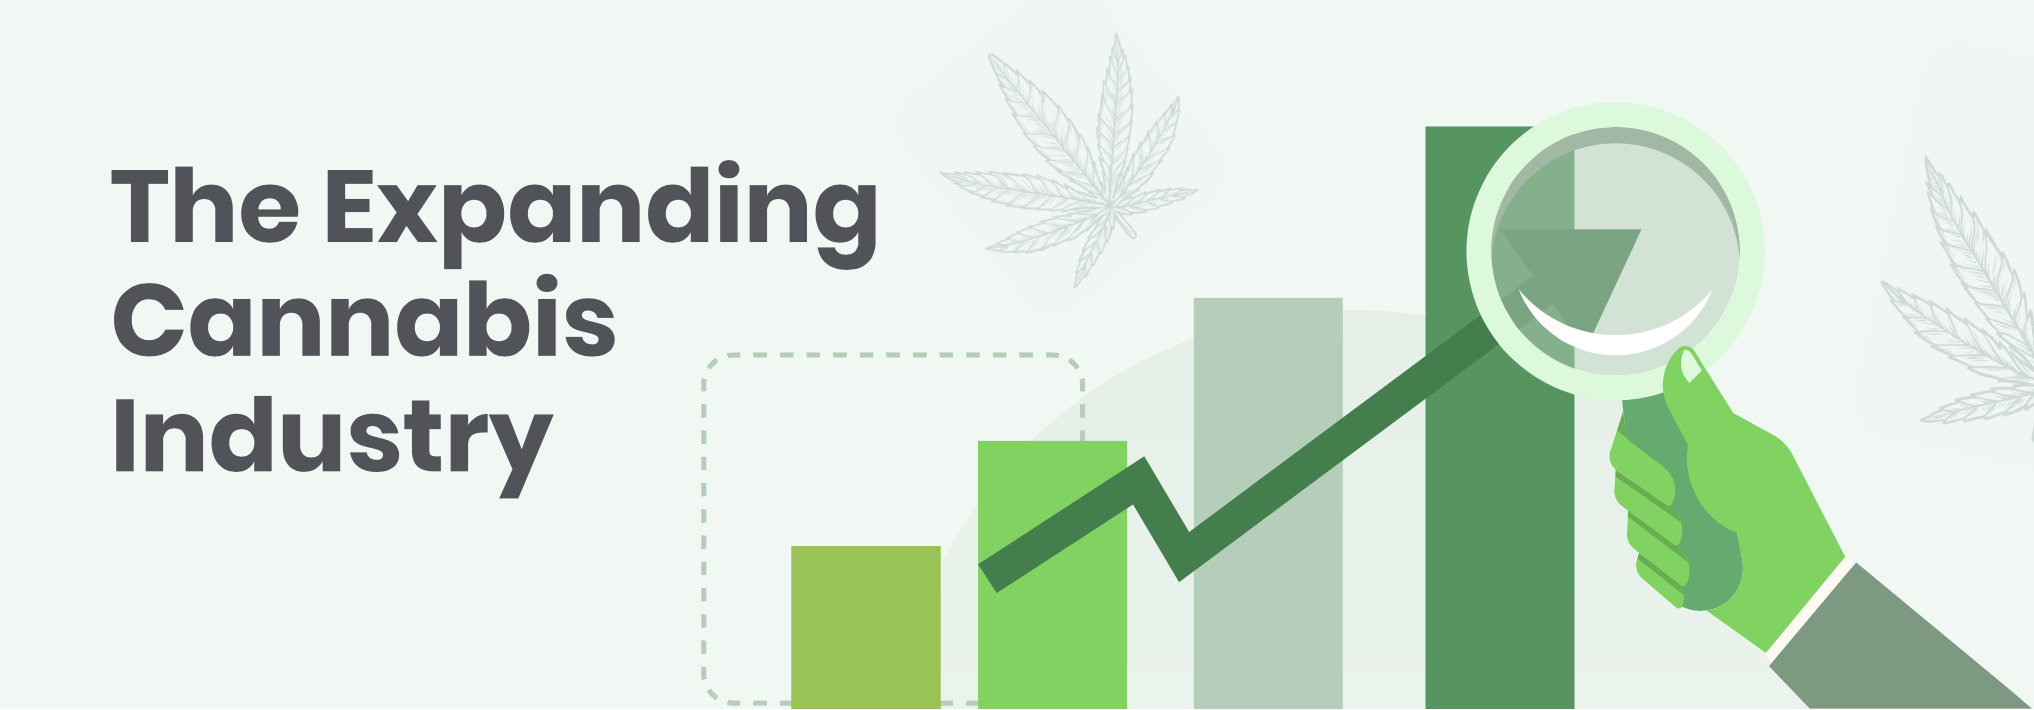 expanding cannabis industry